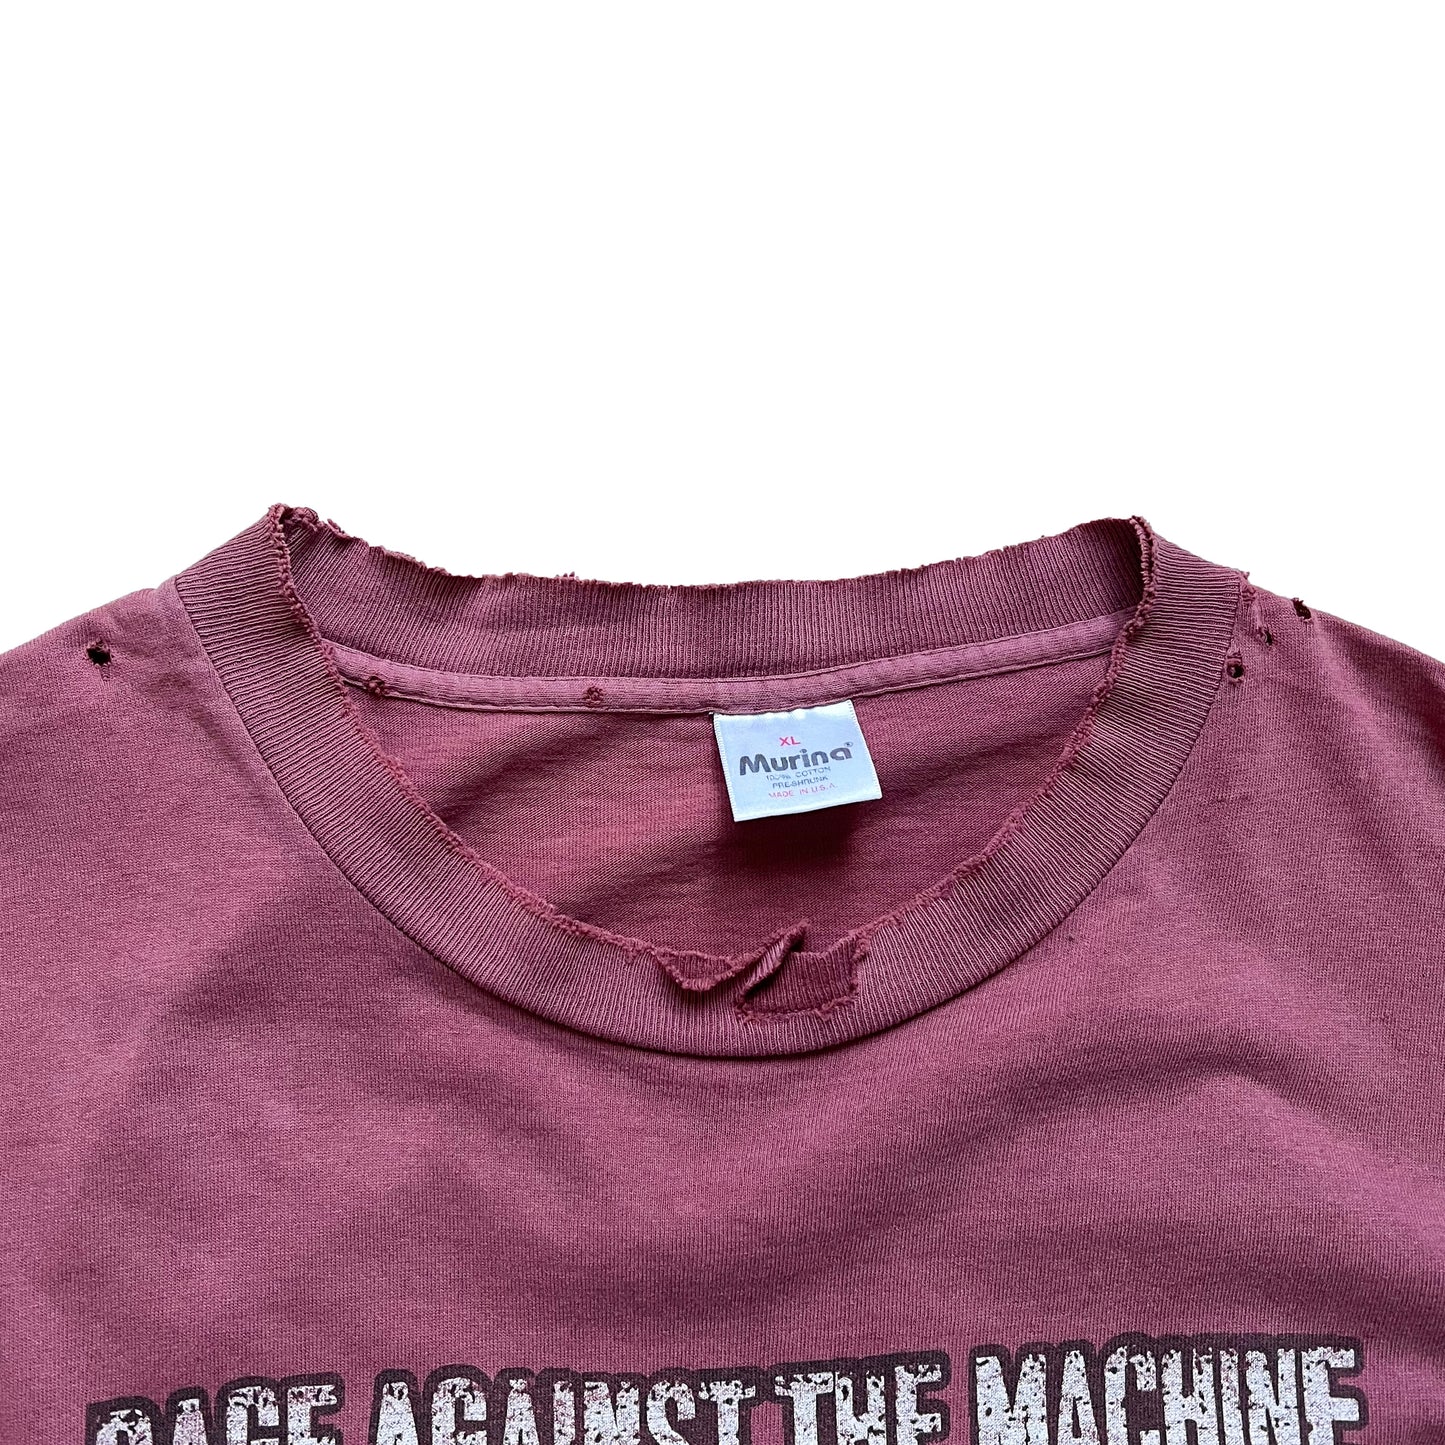 90’s RAGE AGAINST THE MACHINE NORTH AMERICAN TOUR 1997 T-SHIRT